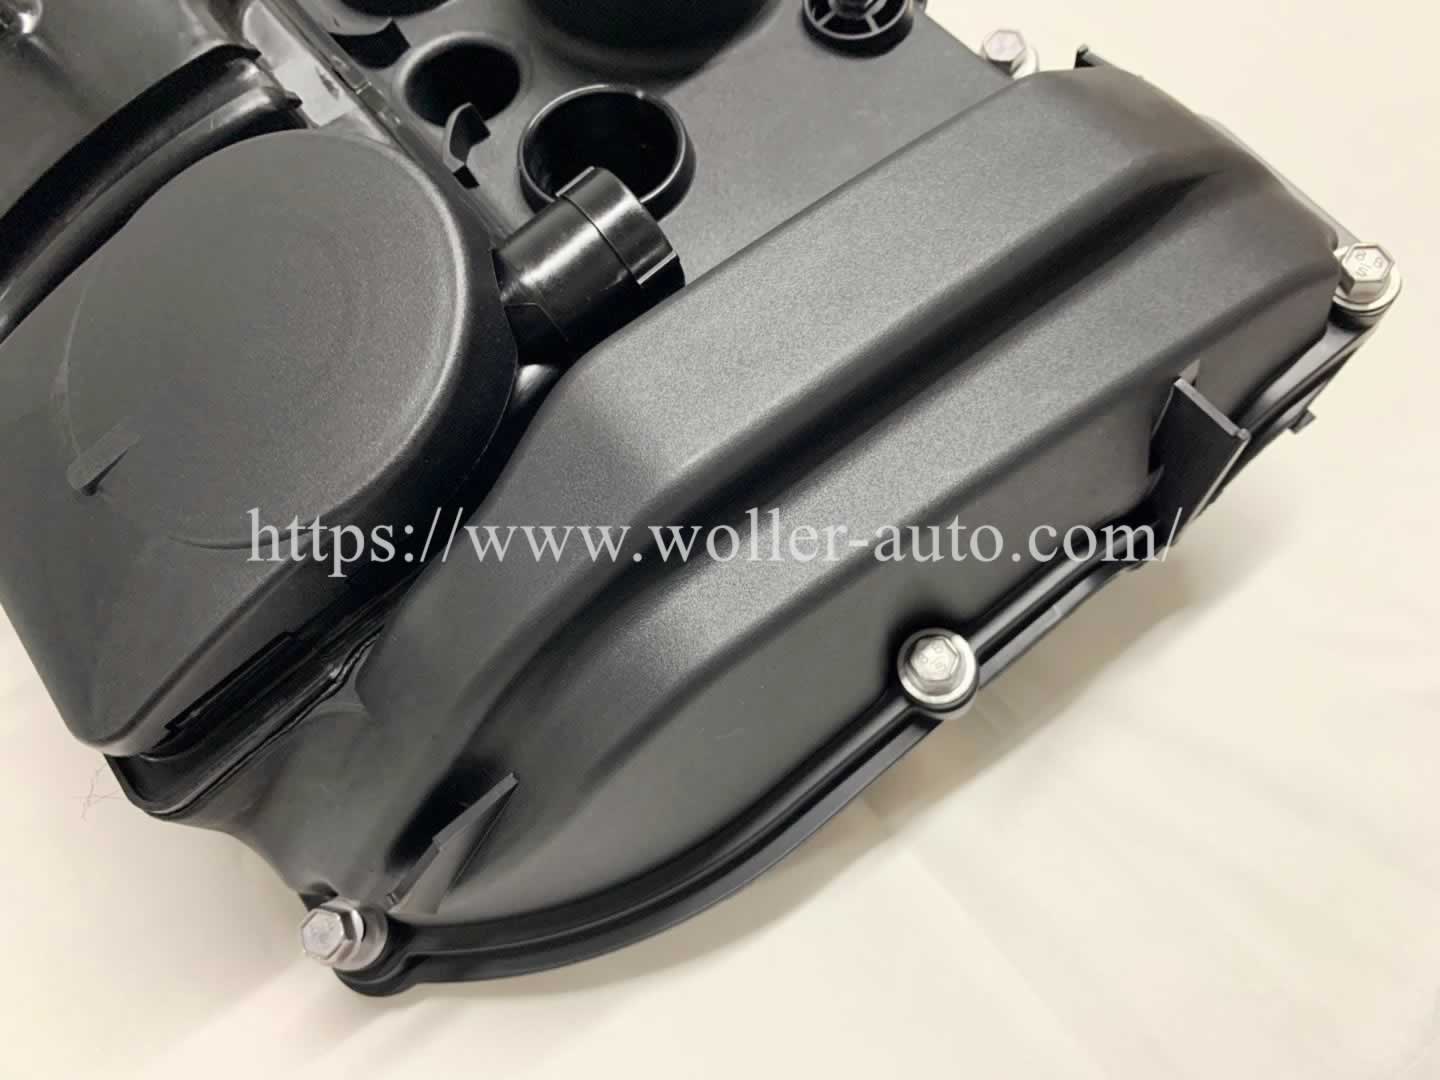 Engine Valve Cover 11127646553 For BMW N13 F20 F21 F30 F35 1 3 series